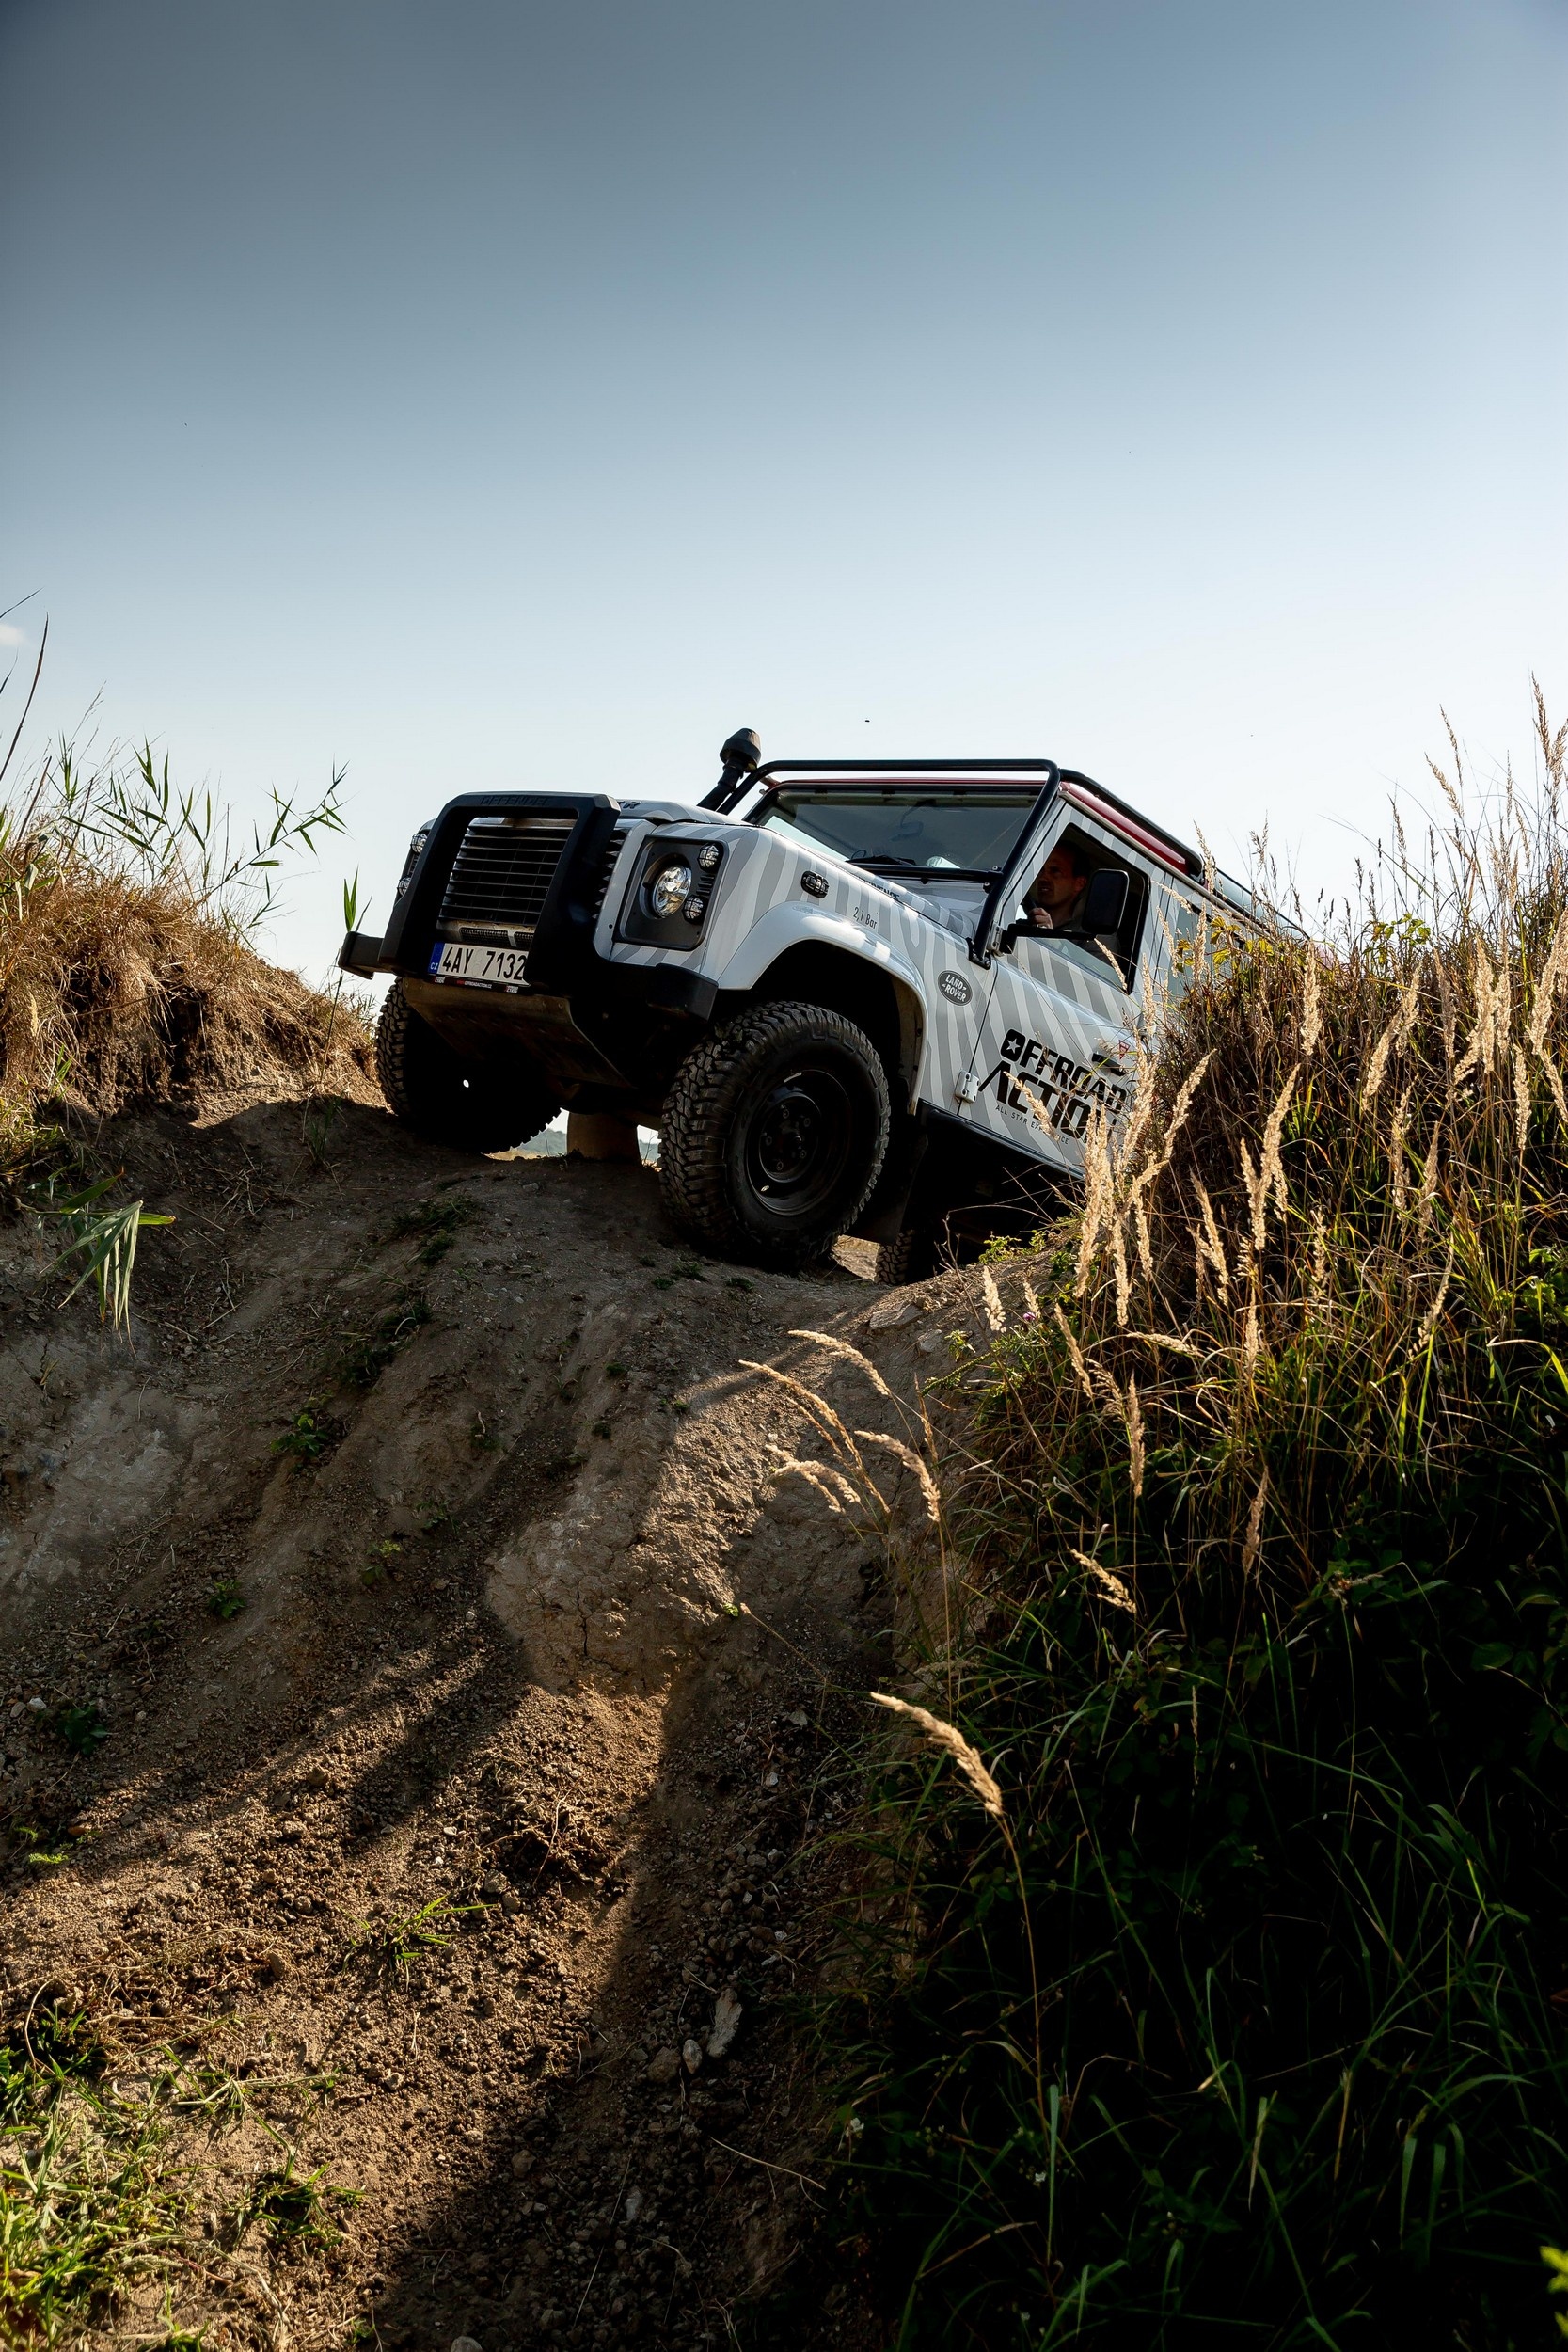 Off-road Driving: Land Rover, SUVs with higher ground clearance, Off-road use. 1670x2500 HD Wallpaper.